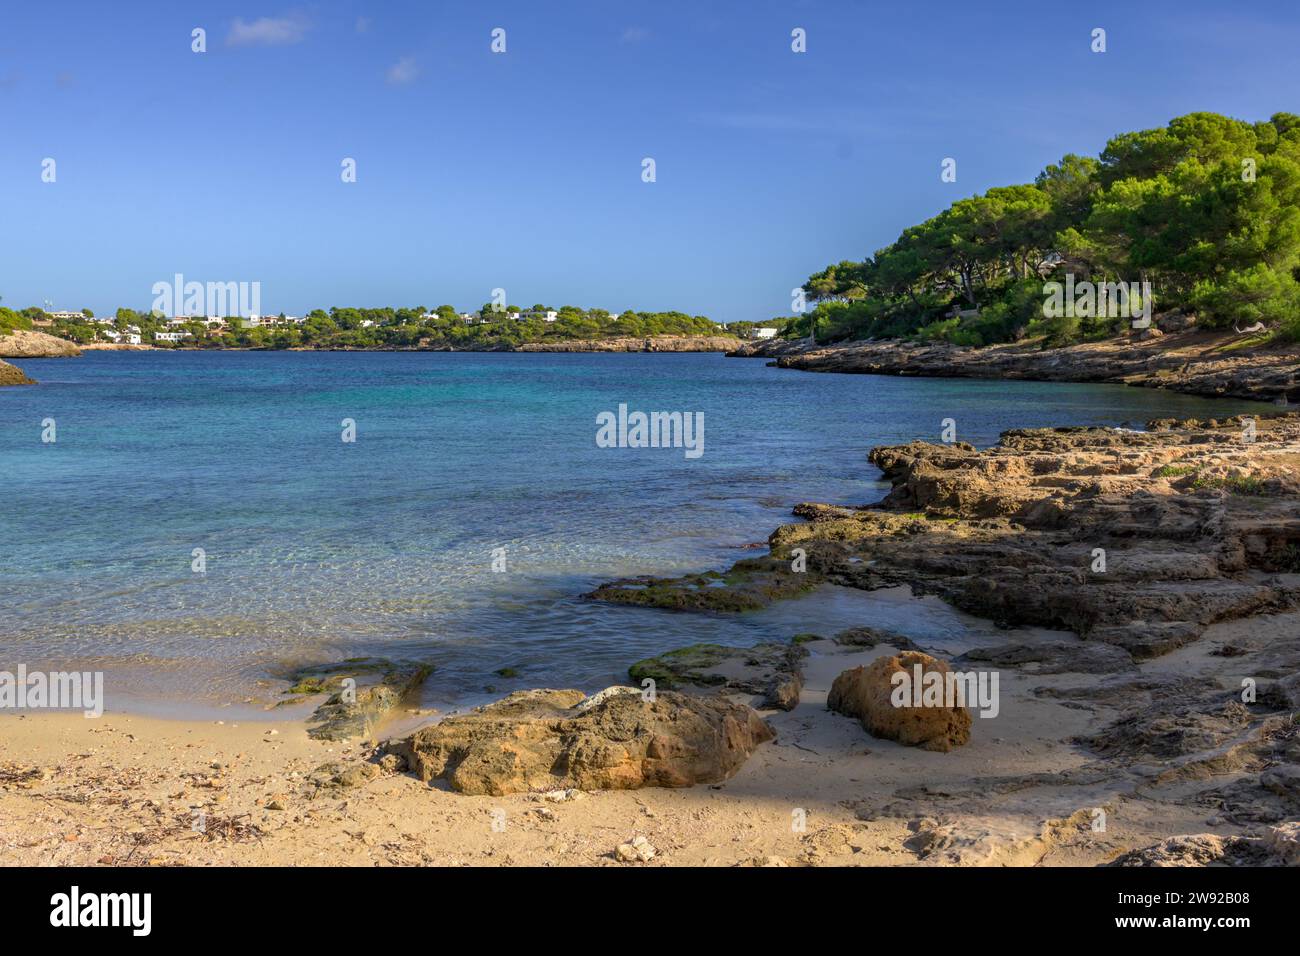 Panoramic view of a small beach in mallorca, balearic islands Stock Photo